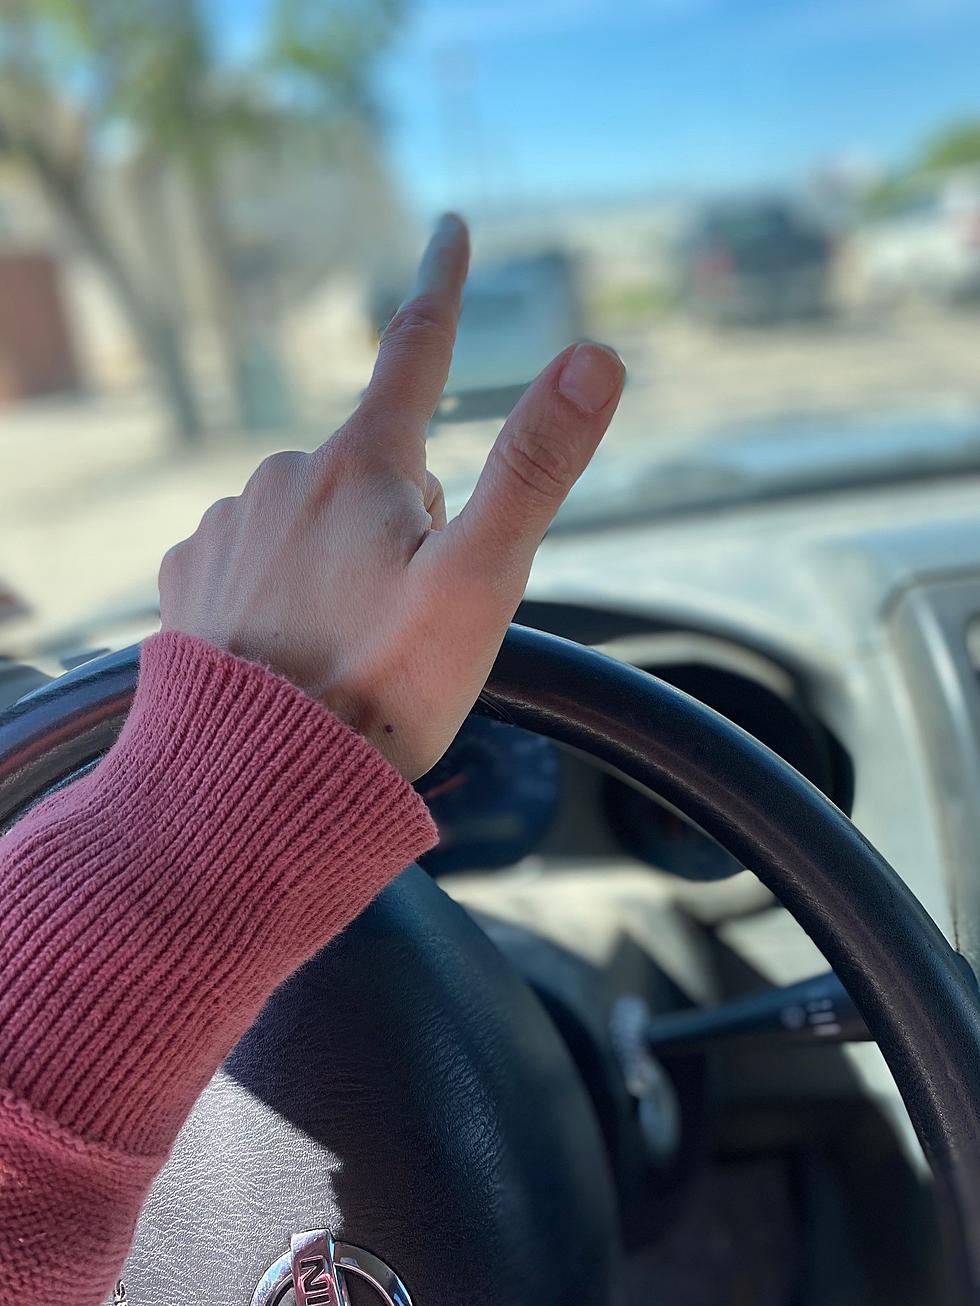 What's The Right Way To Wave In Wyoming While Driving?